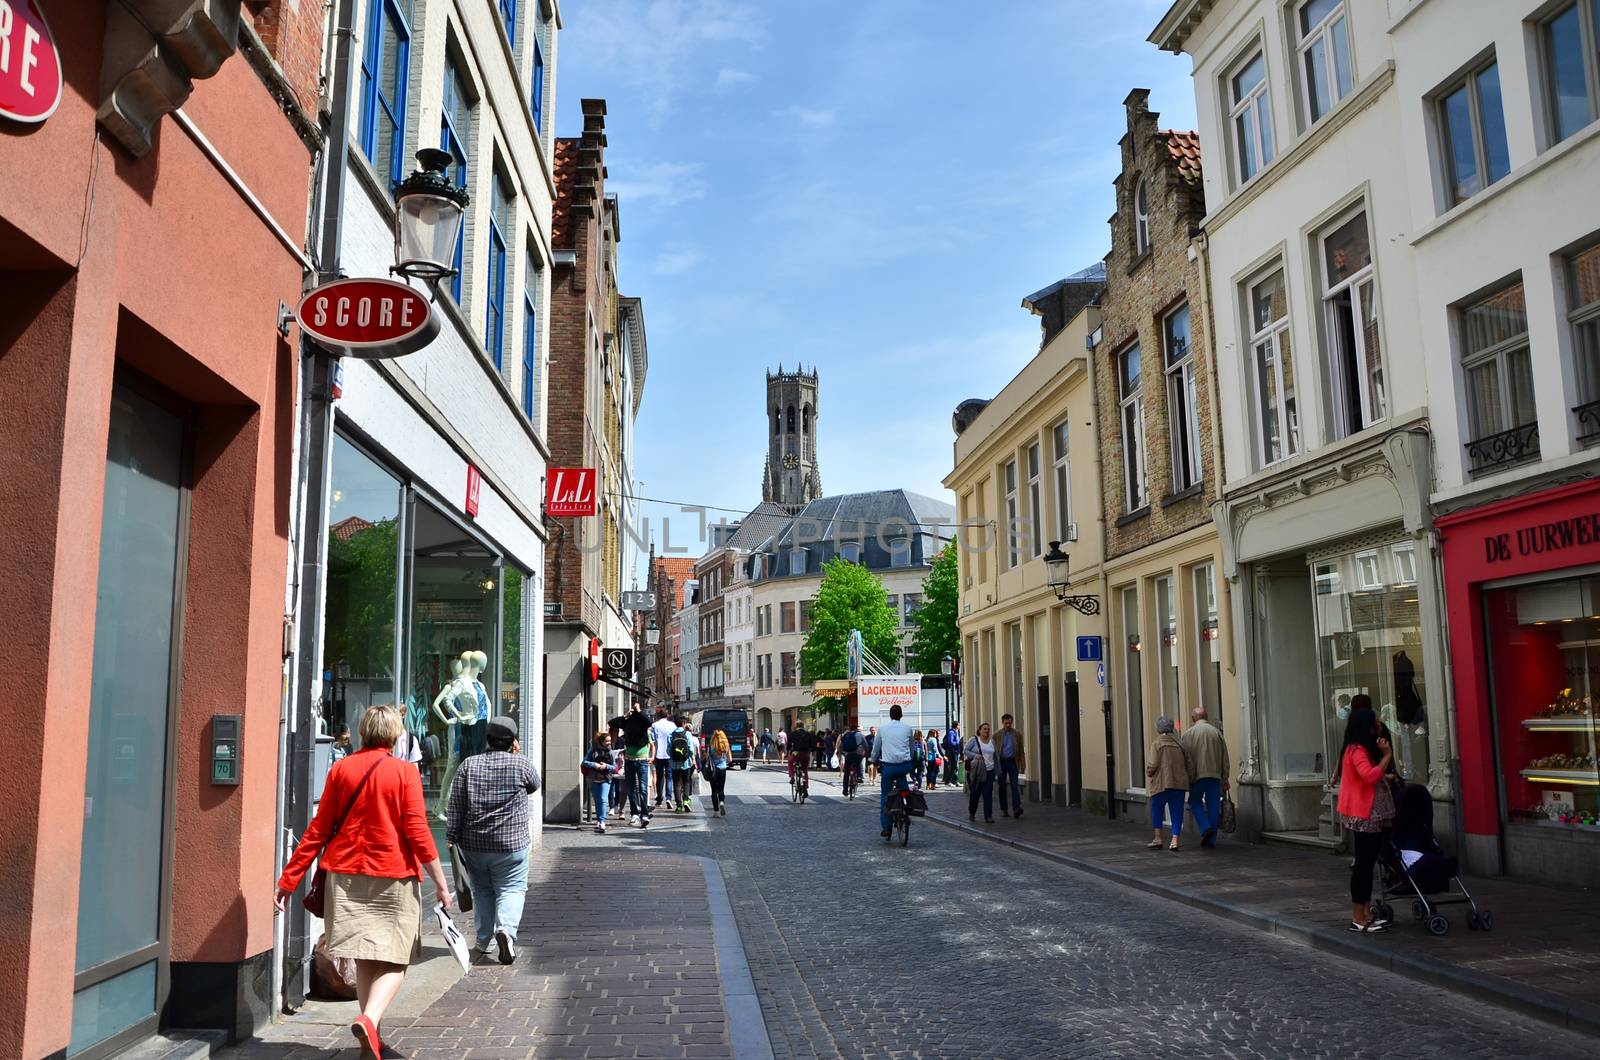 Bruges, Belgium - May 11, 2015: Tourists visit Steenstraat Shopping Street in Bruges, Belgium. Bruges is the capital and largest city of the province of West Flanders in the Flemish Region of Belgium.